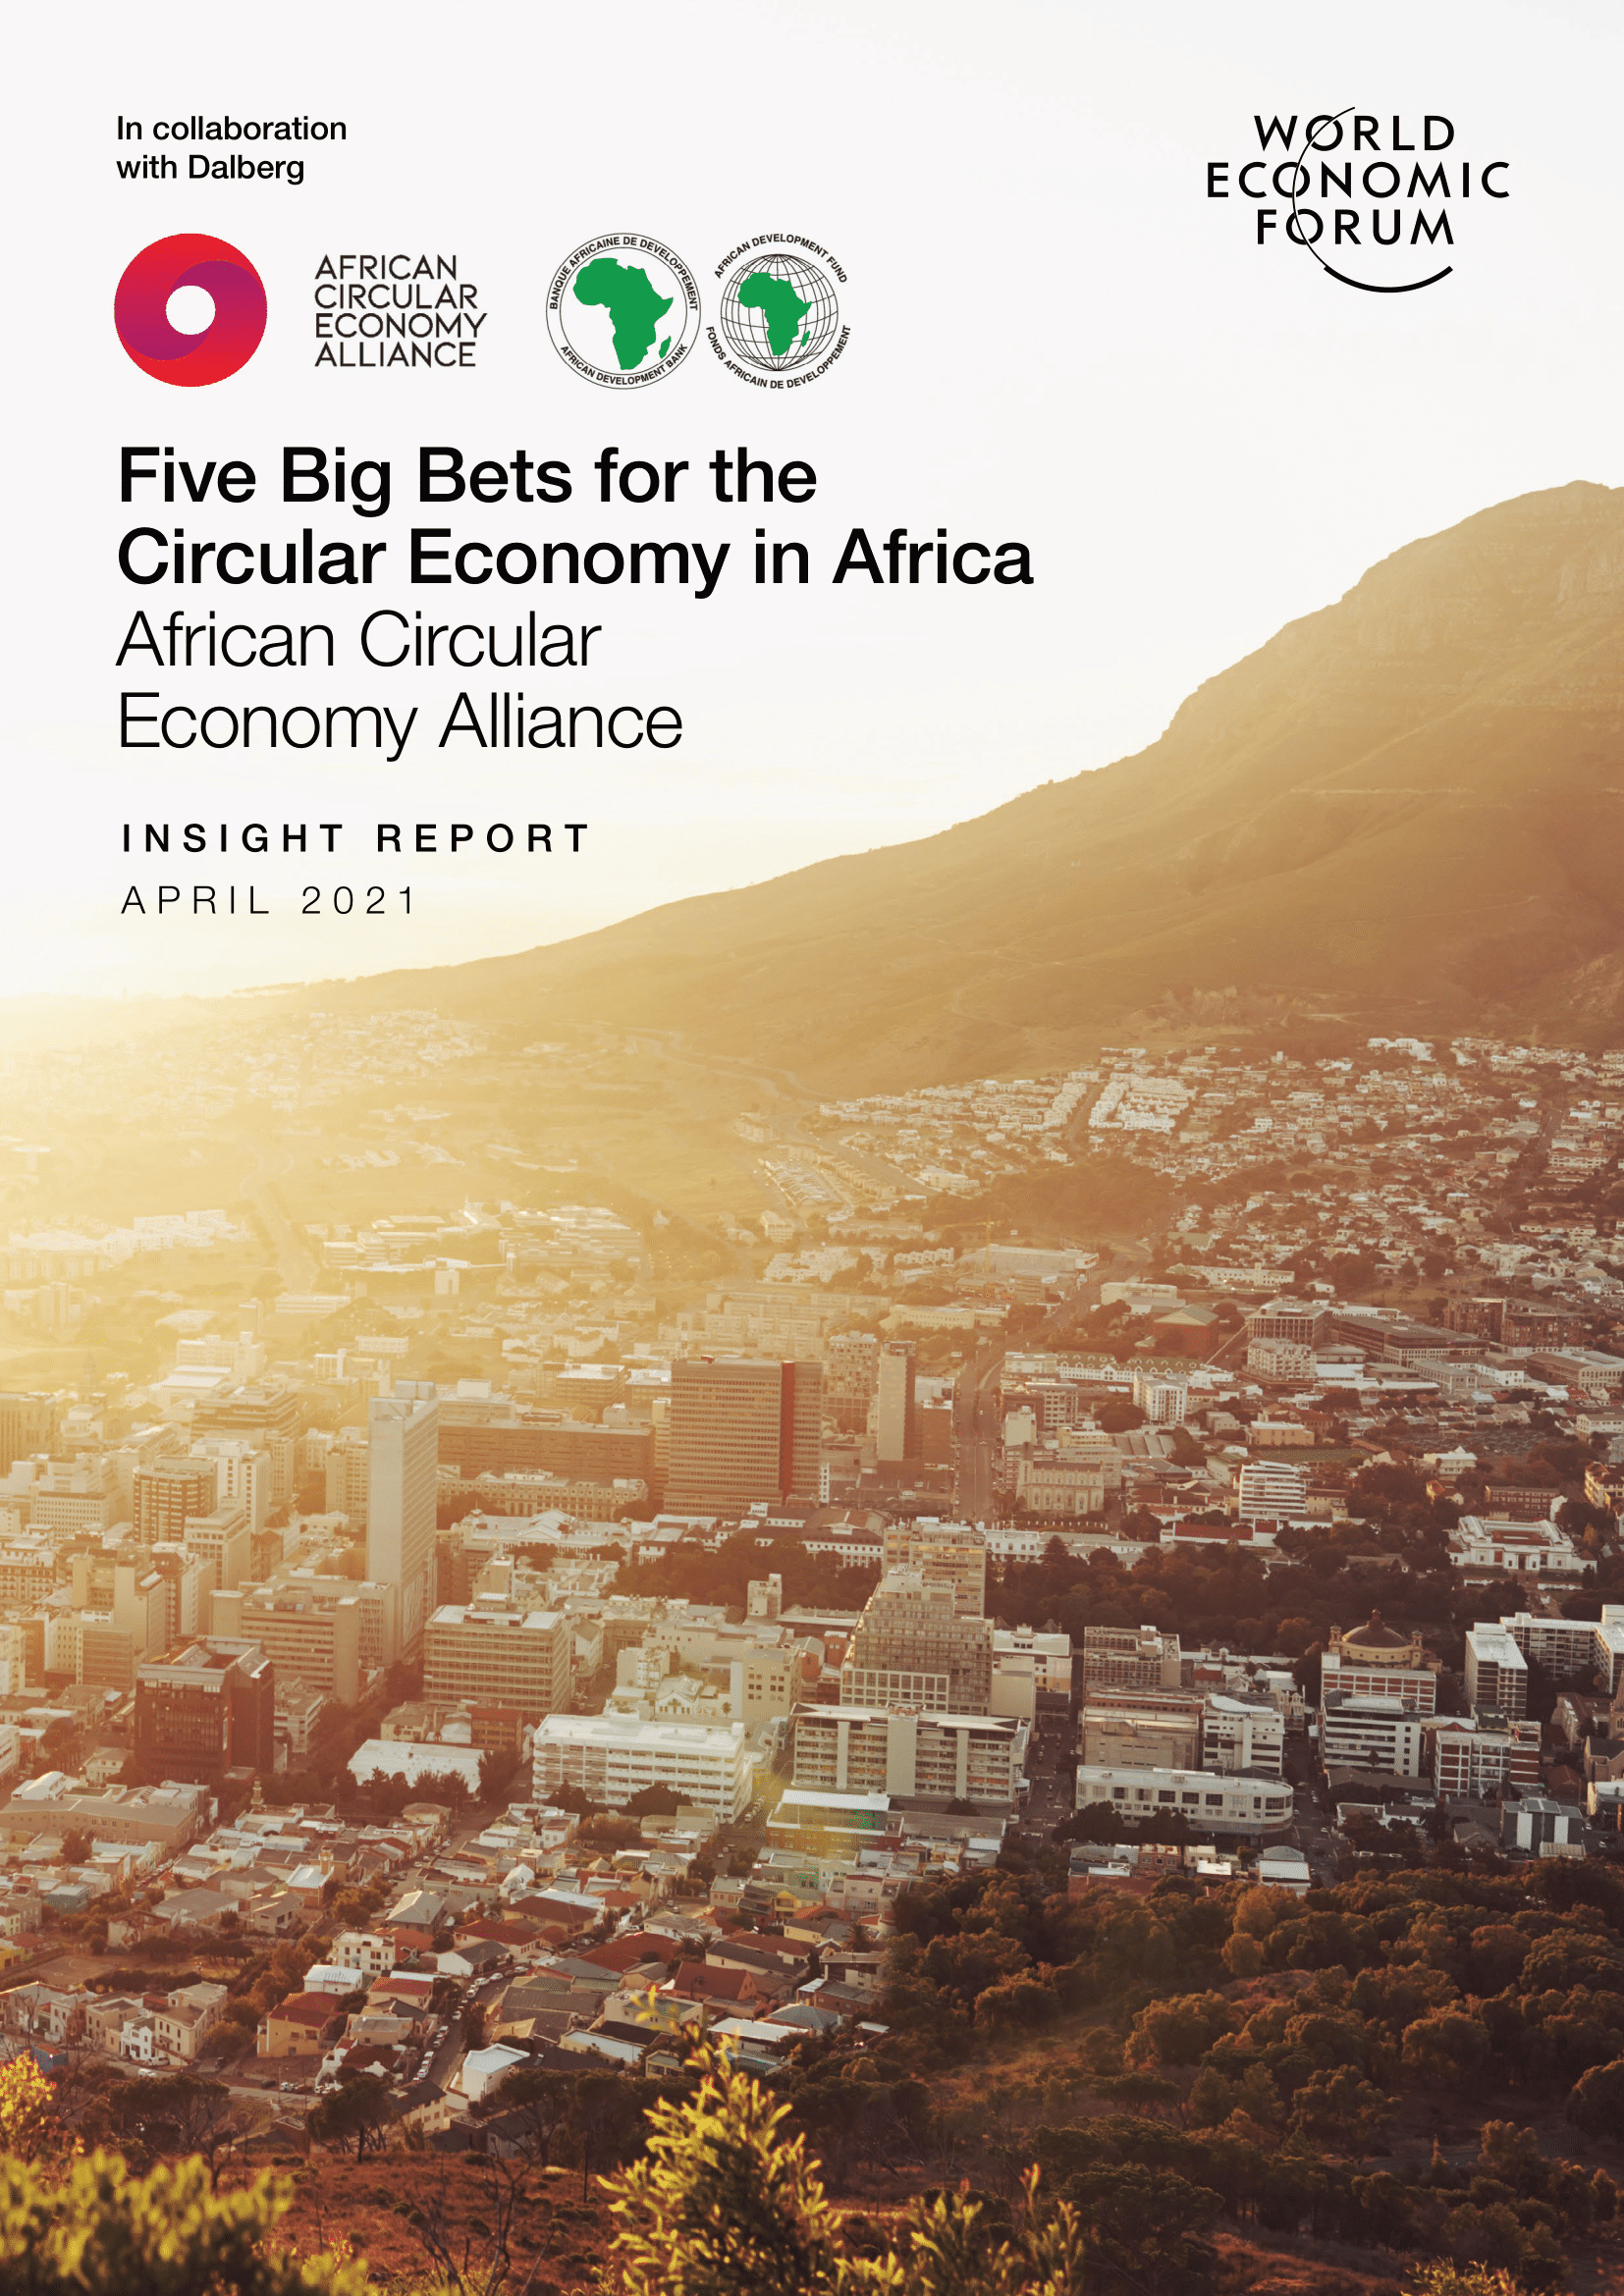 Five Big Bets for the Circular Economy in Africa African Circular Economy Alliance - April 2021